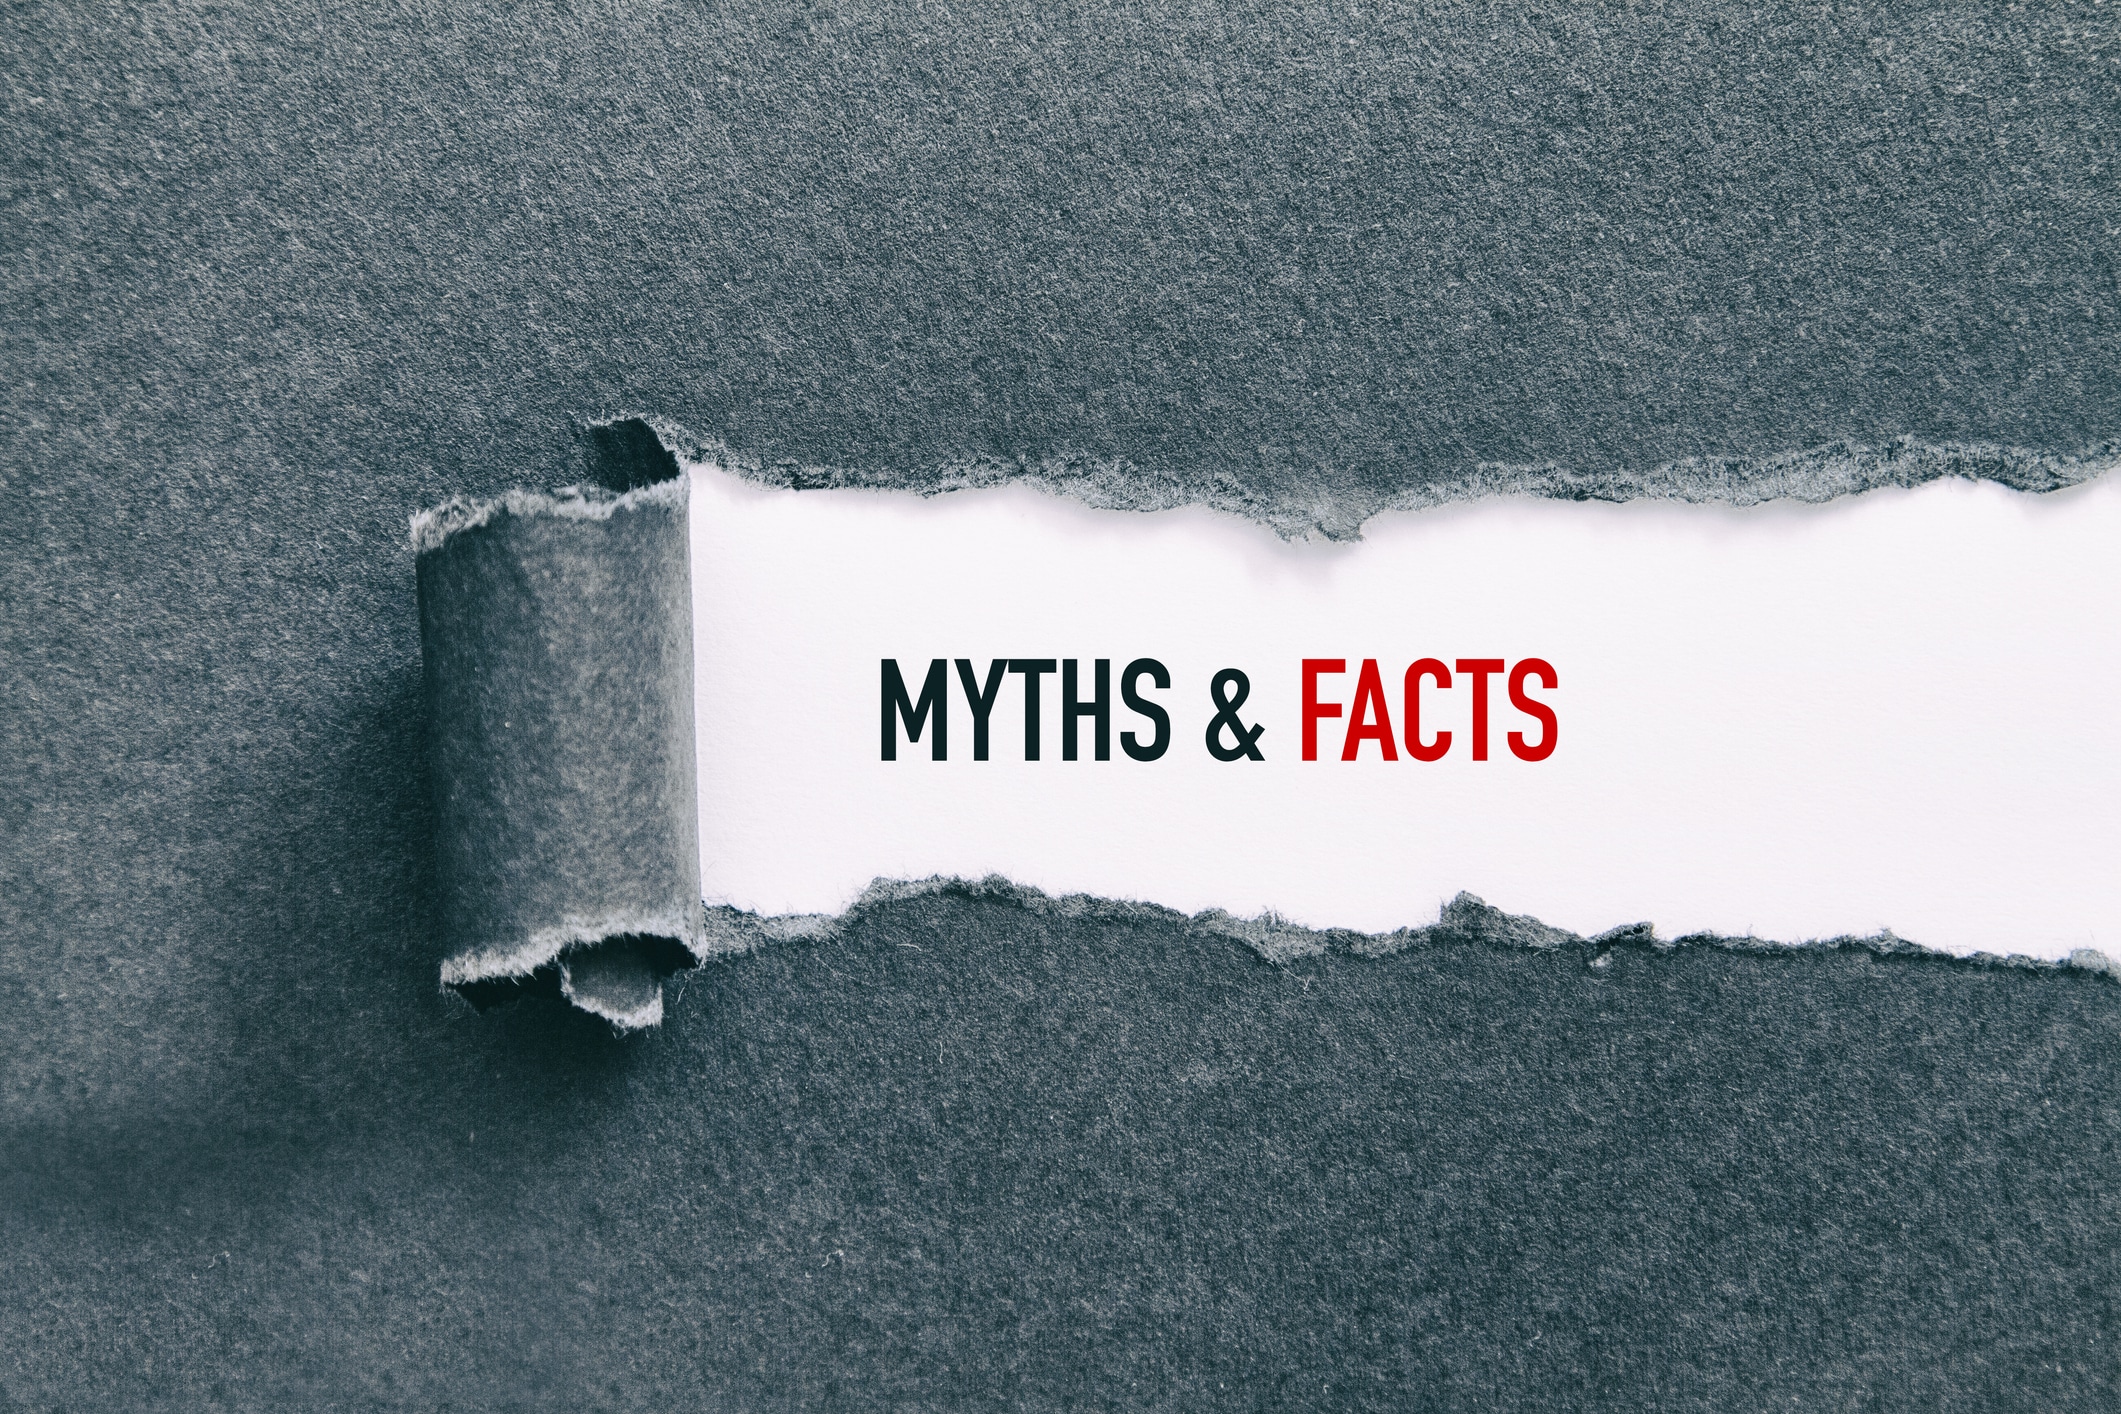 Fabric ripped away to review "Myths & Facts" with facts in red text